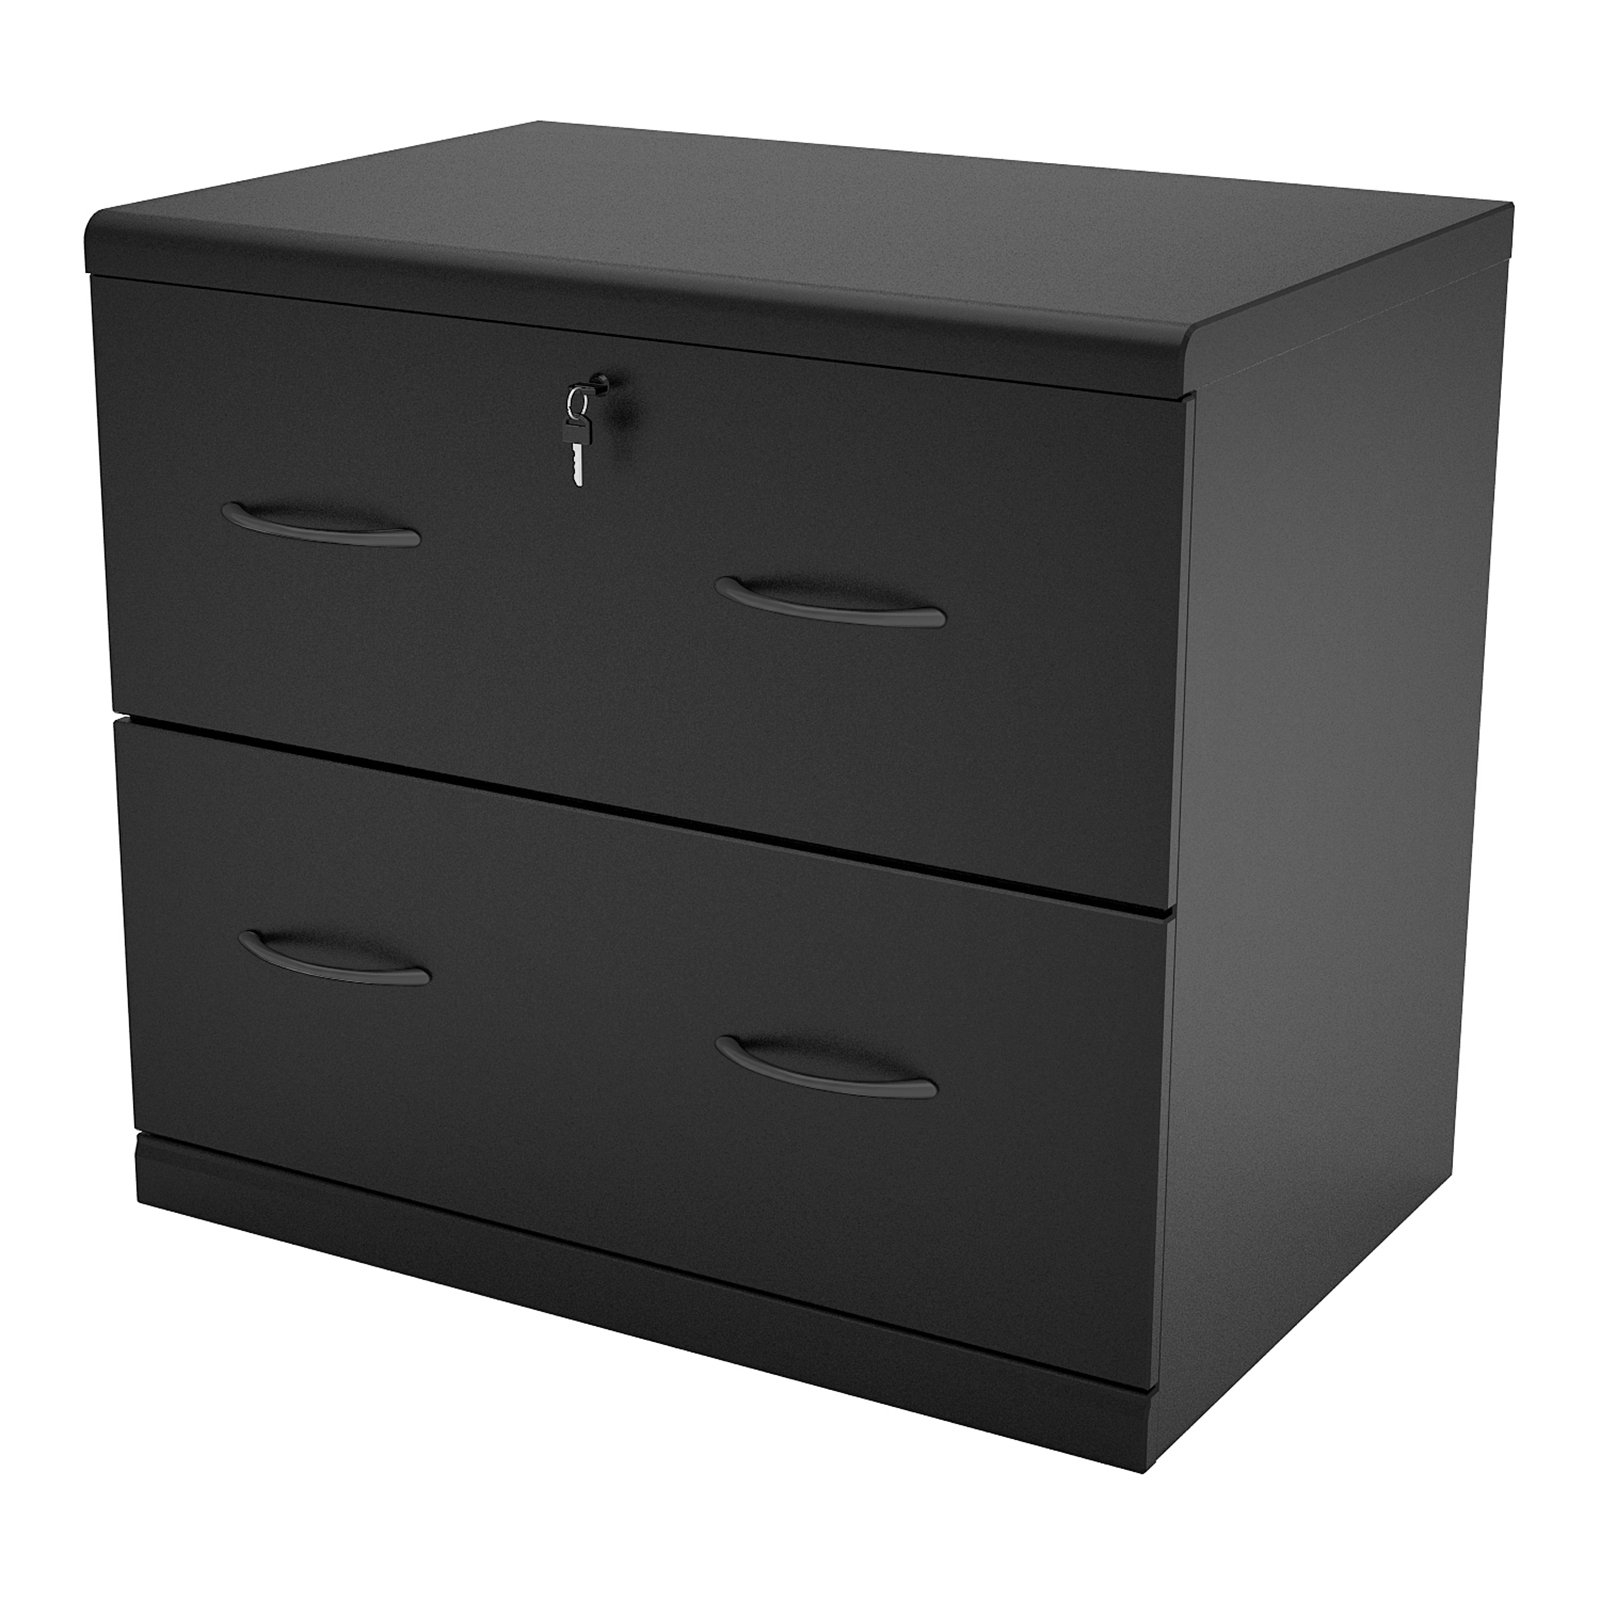 2 Drawer Lateral Wood Lockable Filing Cabinet Black Walmart within proportions 1600 X 1600